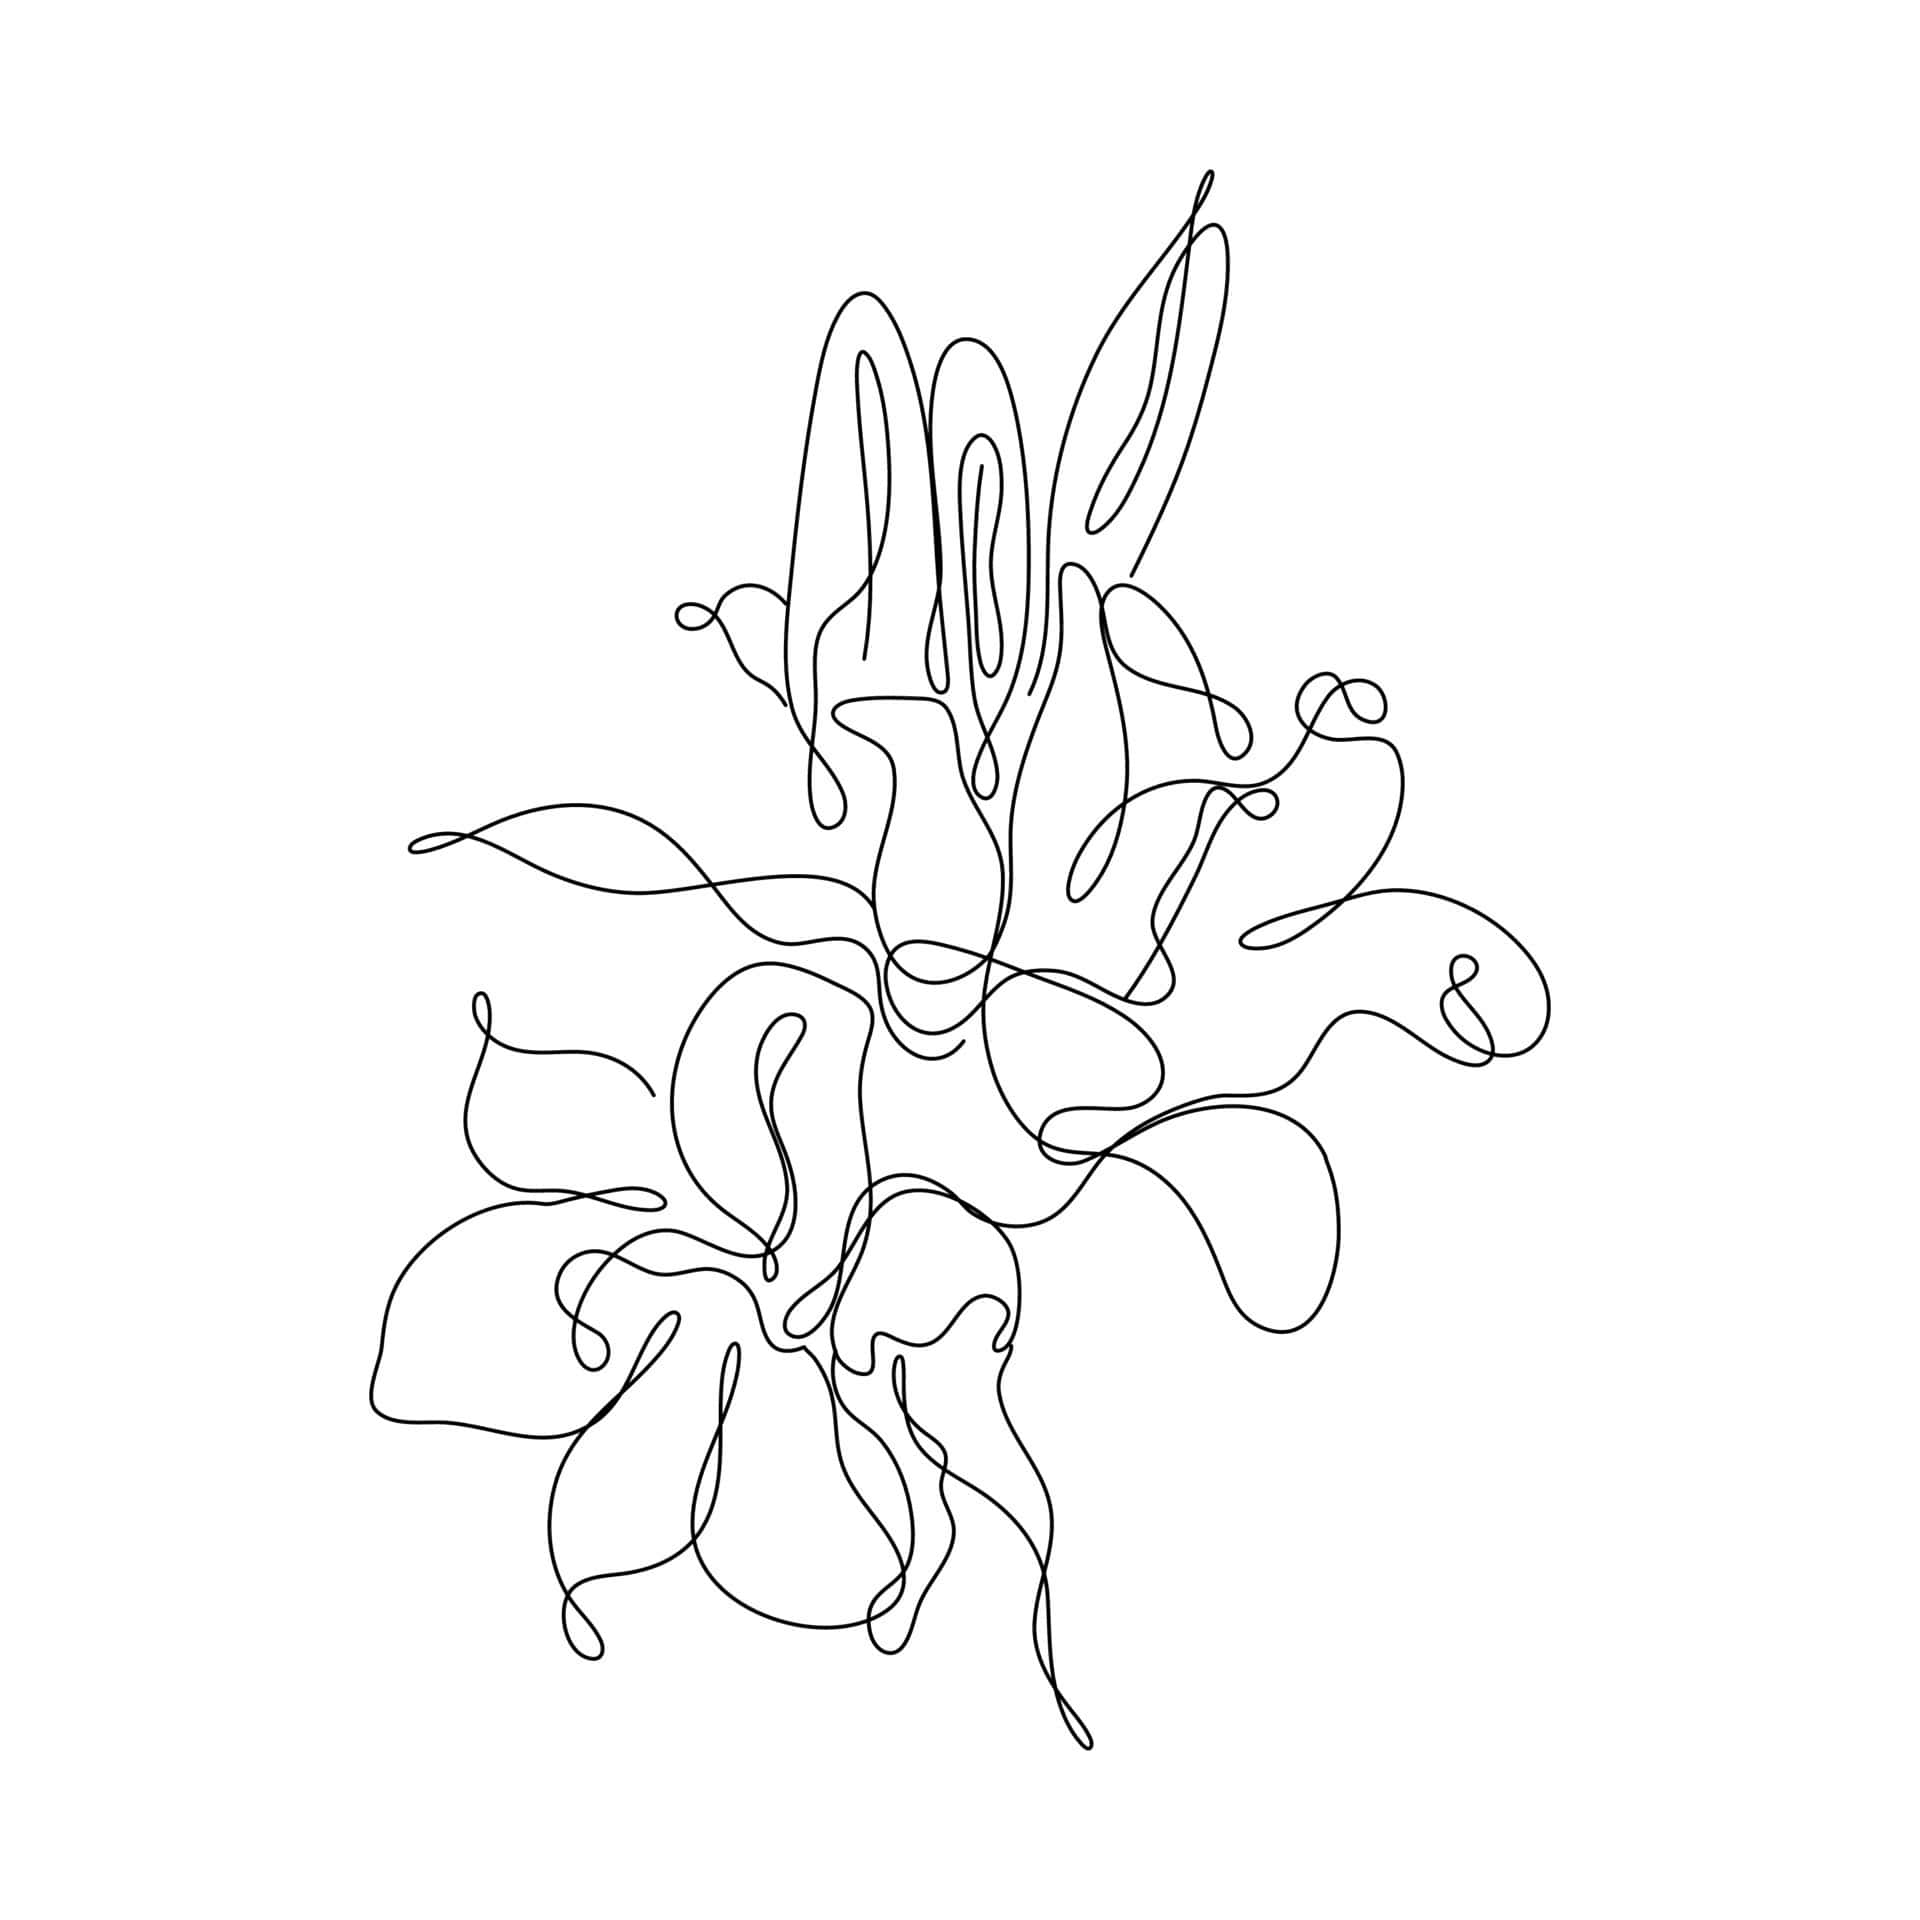 A Line Drawing Of A Flower